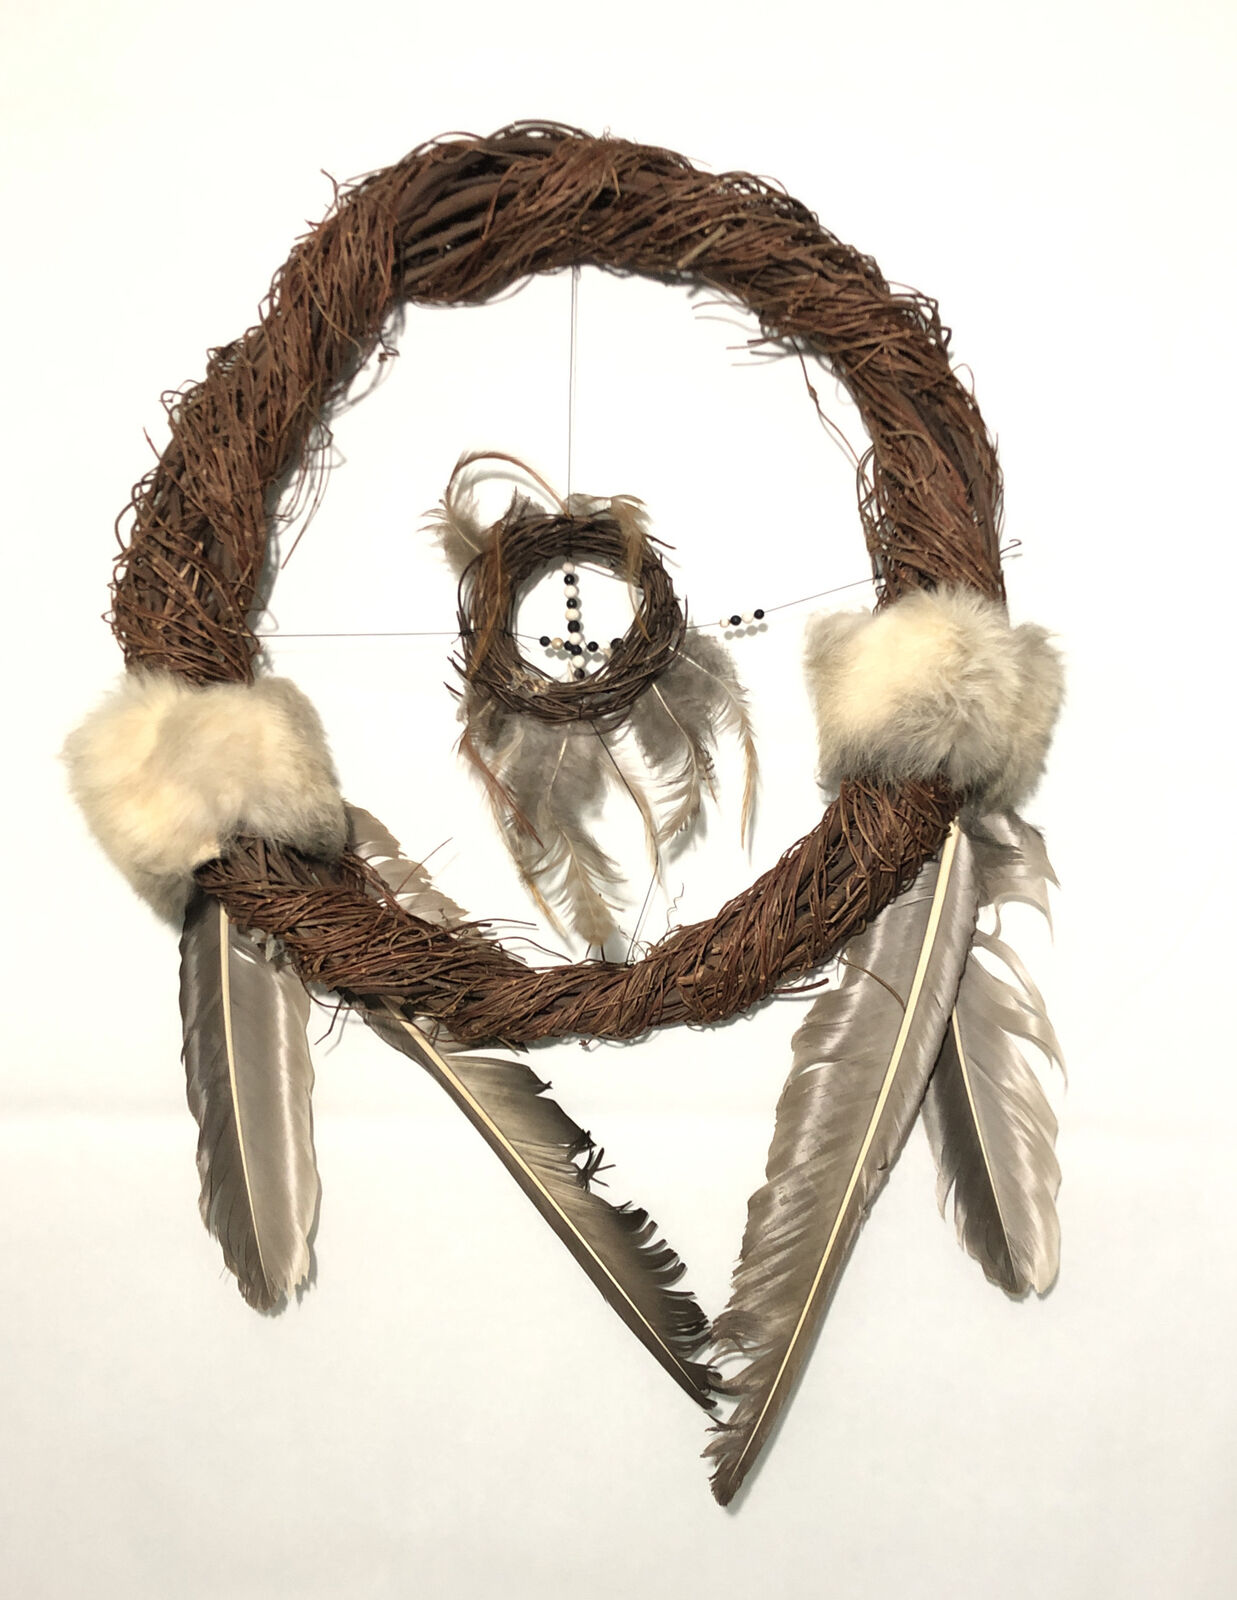 Native American Dream Catcher- Large 15” W/ Fur, Beads & Feathers.